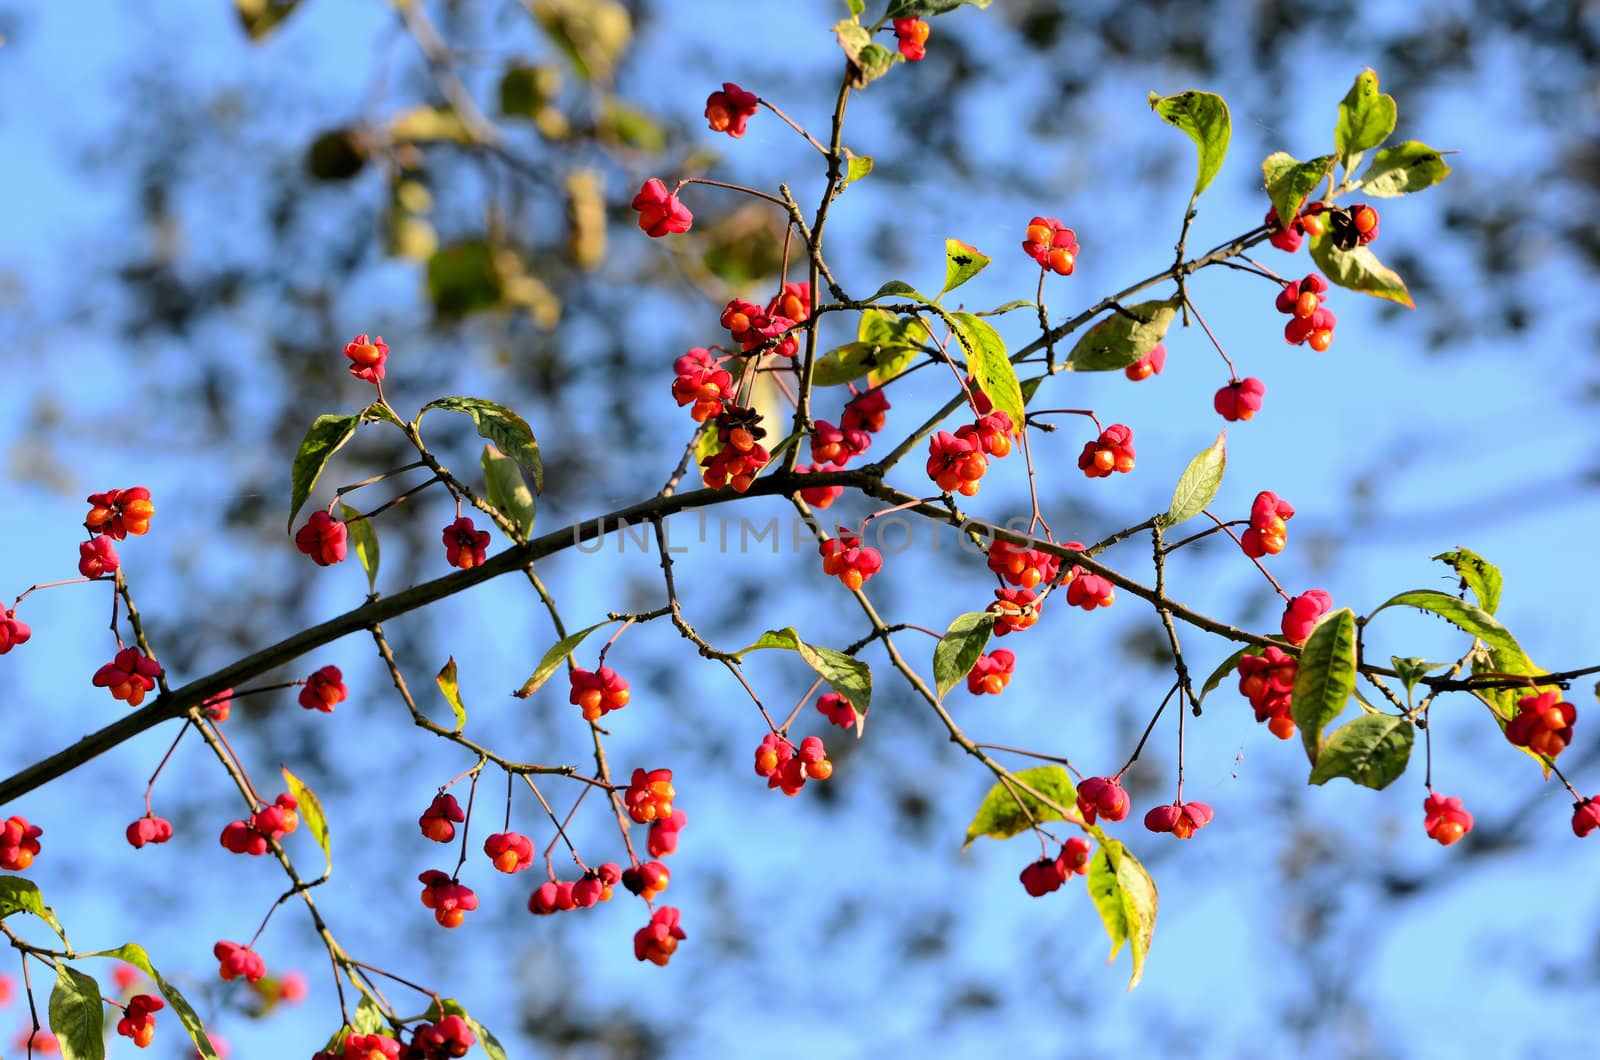 The photo shows a bunch of red fruits and seeds of Euonymus growing on a small tree.